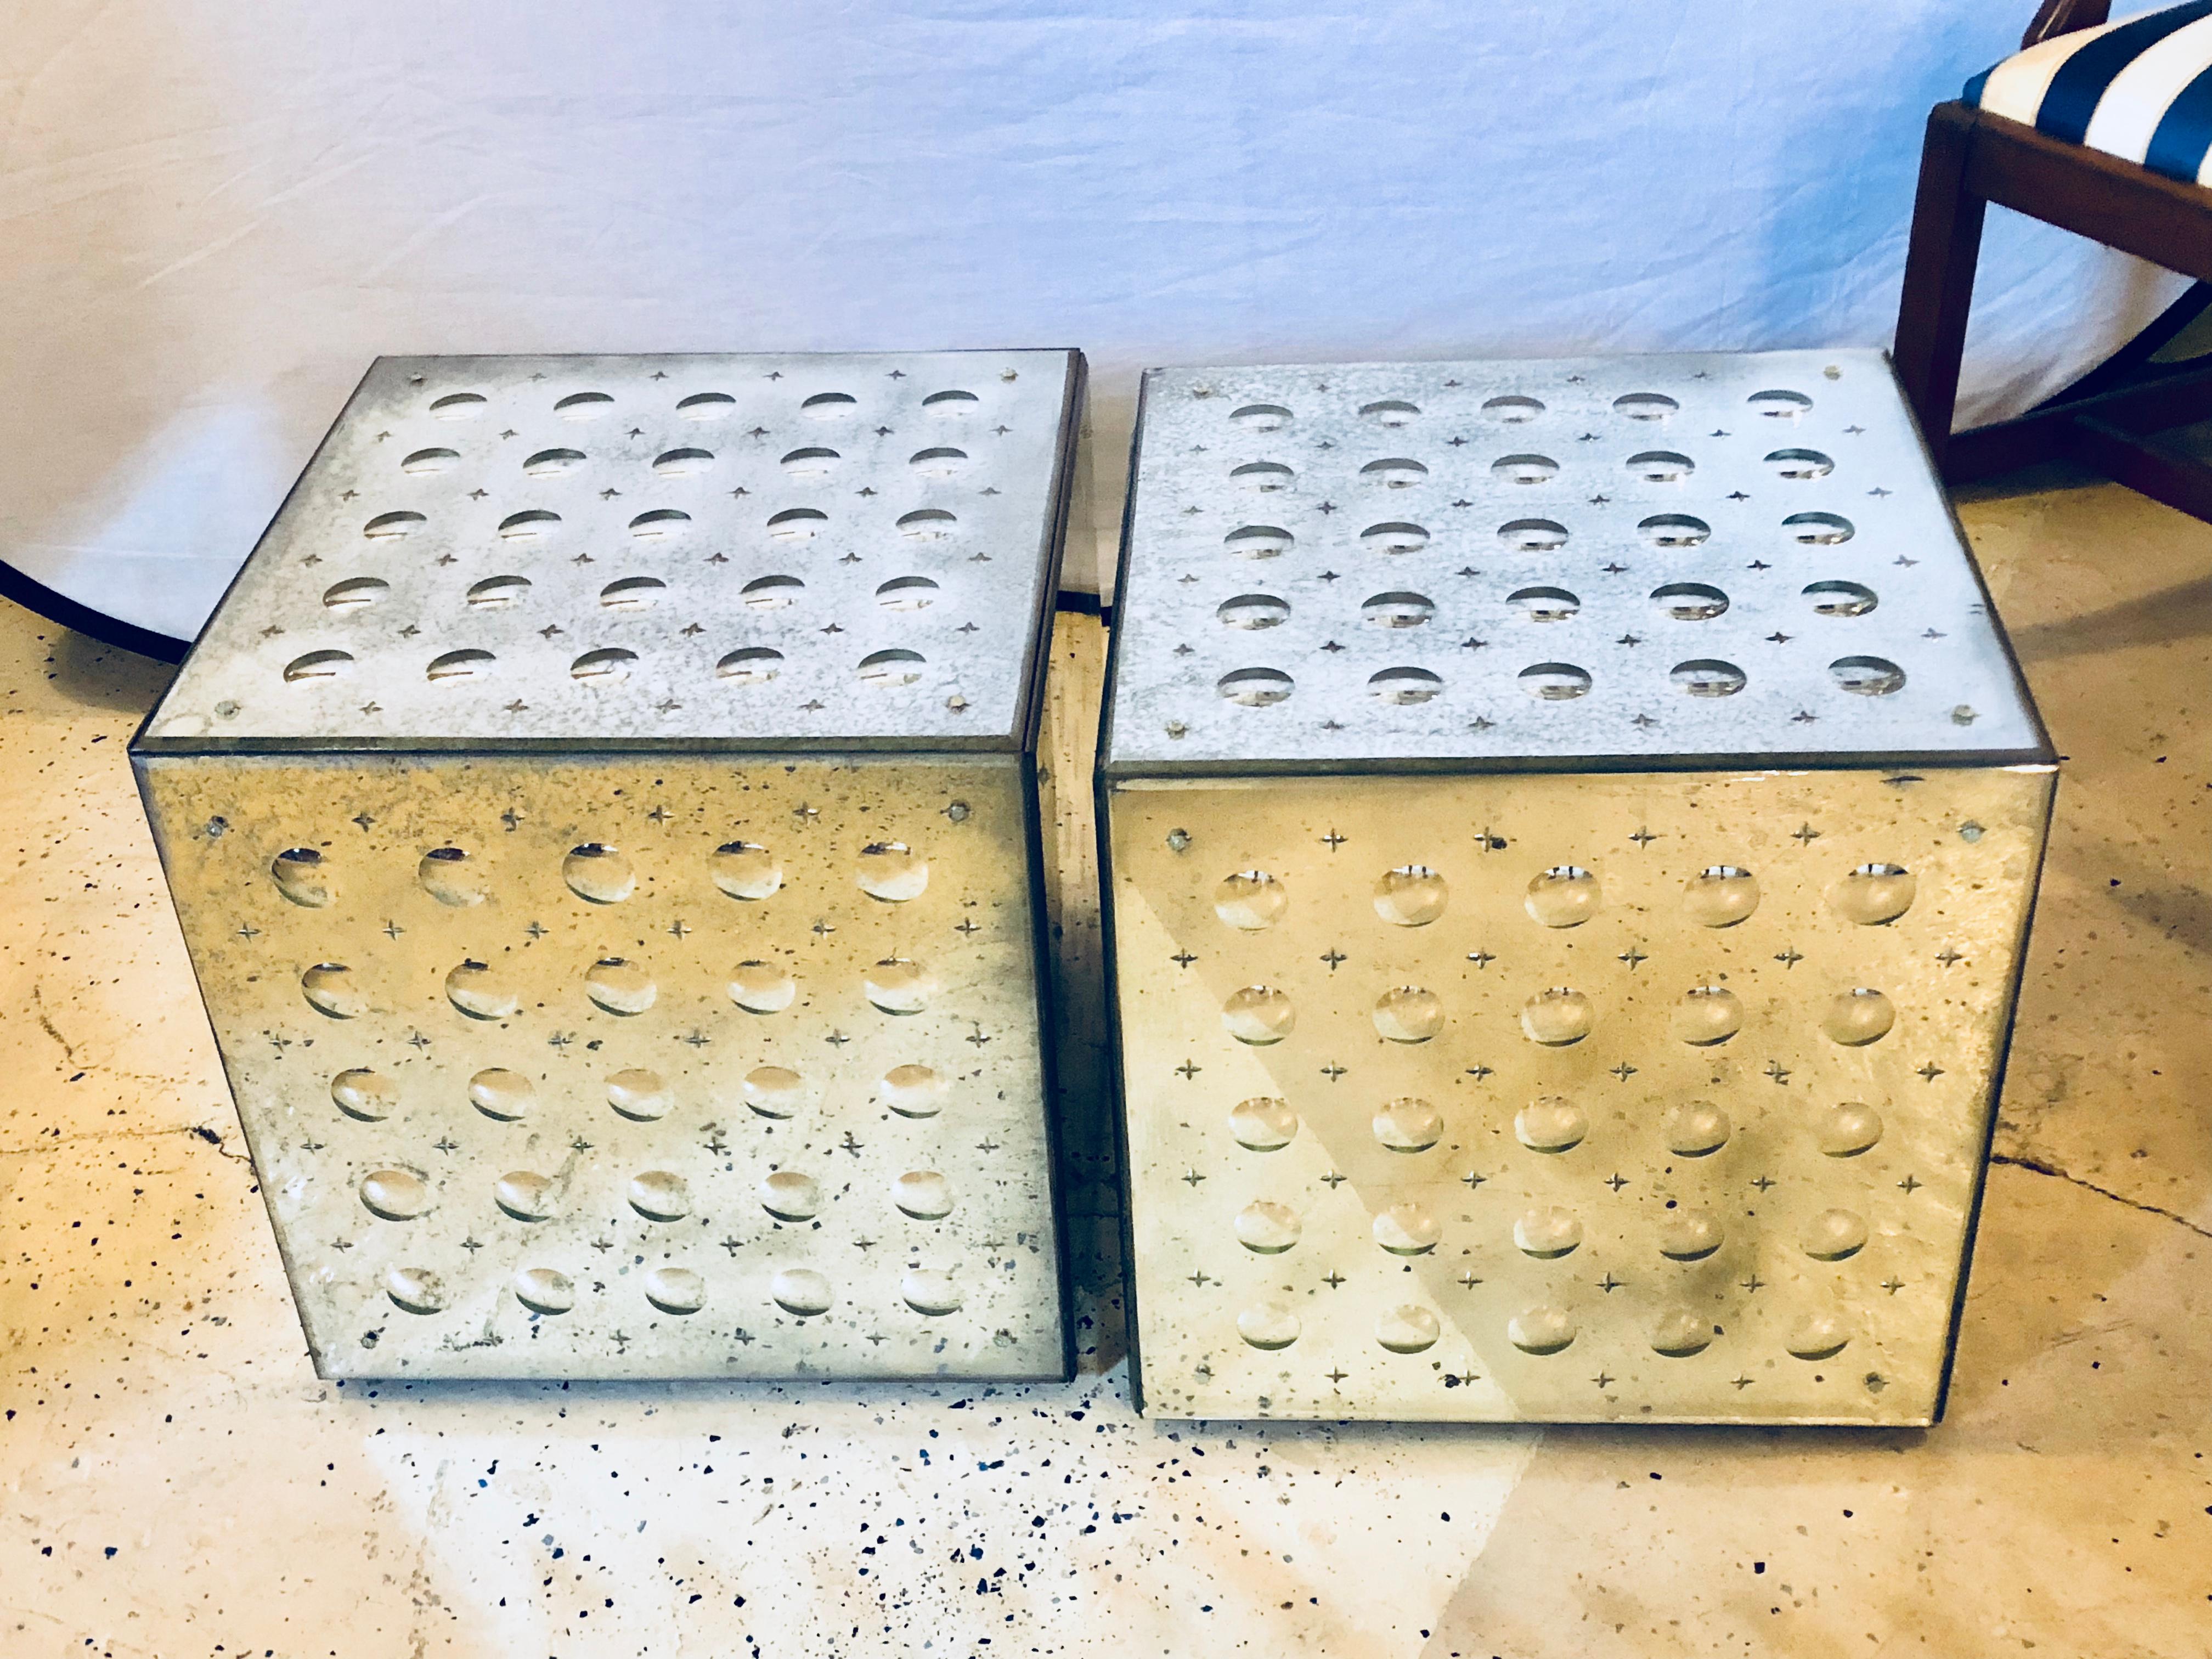 Pair of silver mirrored glass cubes on casters. Midcentury mirrored three-dimensional glass cube coffee or end tables on casters. These appear to be gold however, the color is more silver mirror like. Can be formed to make a rectangular or square